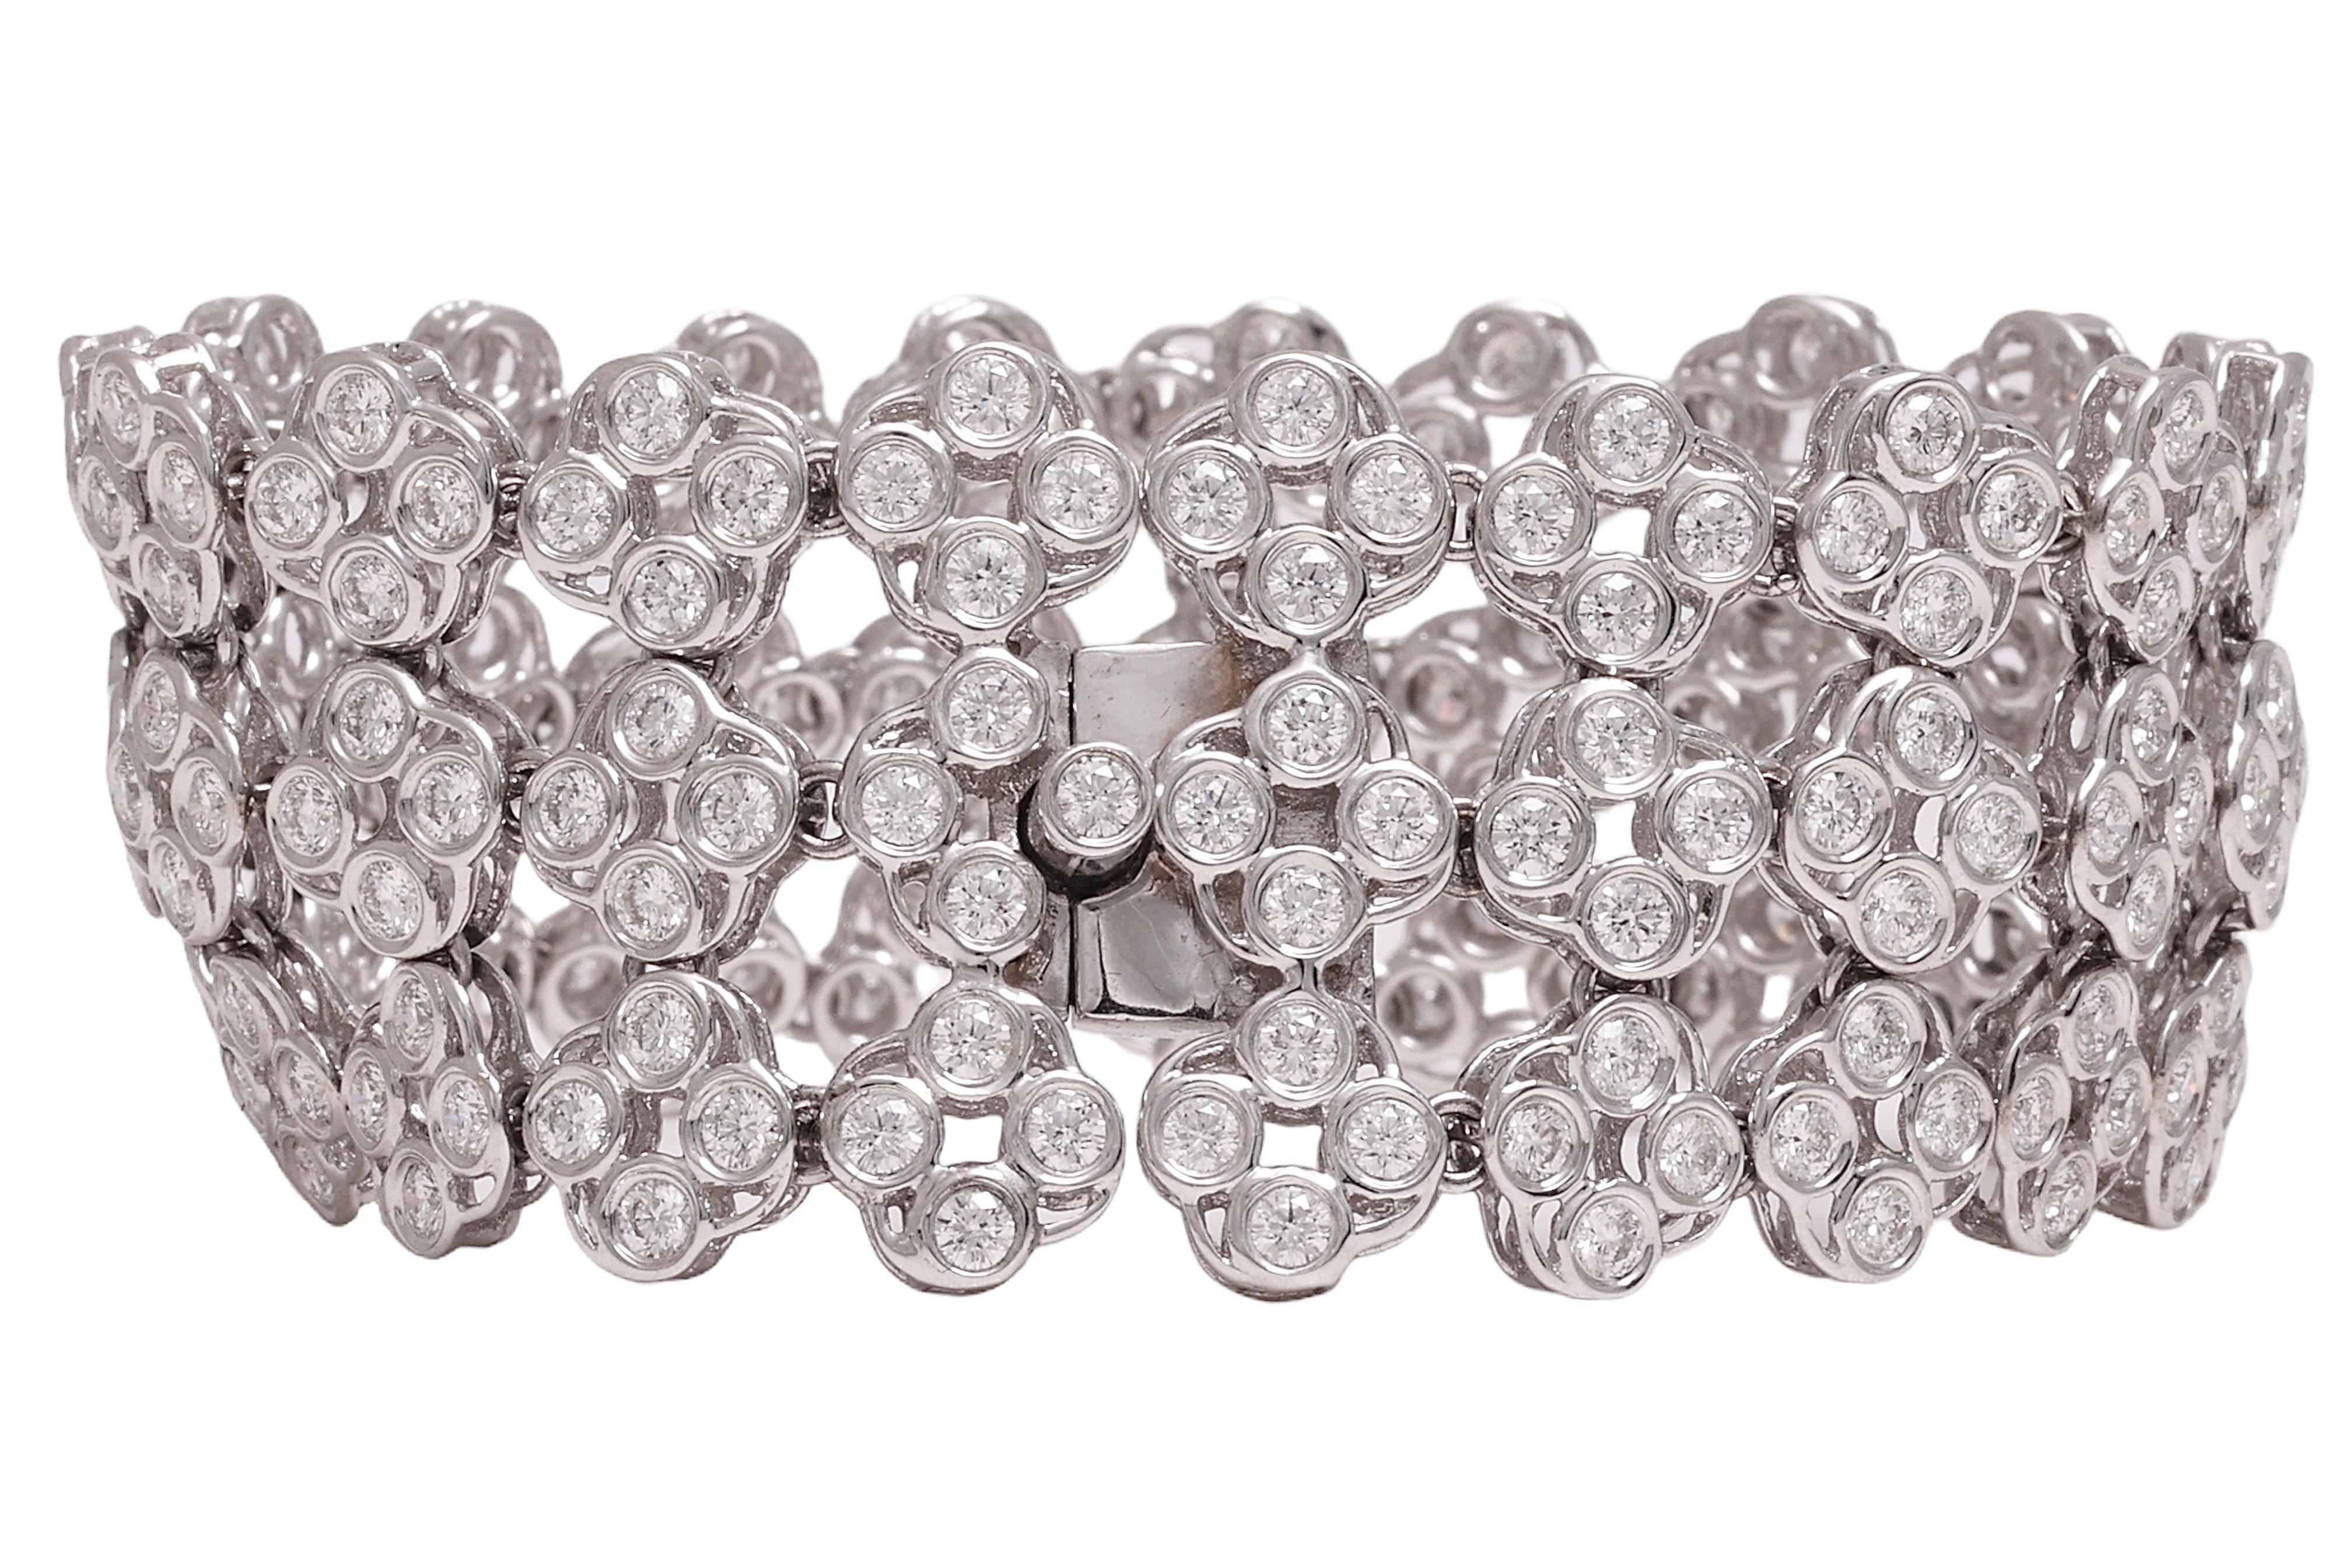 18 kt. White Gold 3 Row Tennis Bracelet With 10.57 ct. Round Cut Diamonds For Sale 2